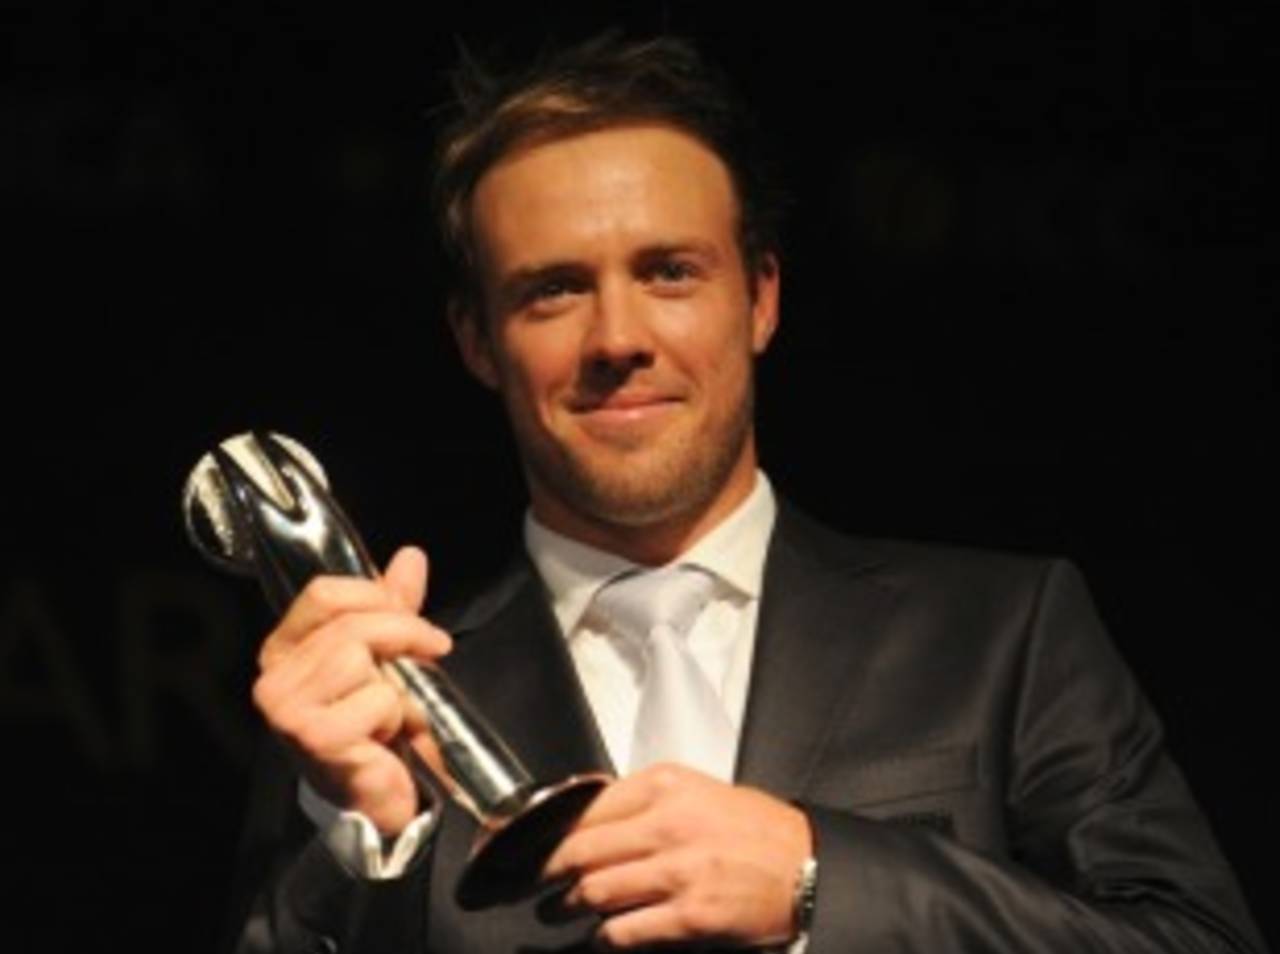 AB de Villiers, the South Africa batsman, was named the ODI player of the year at the 2010 ICC Awards, Bangalore, October 6, 2010